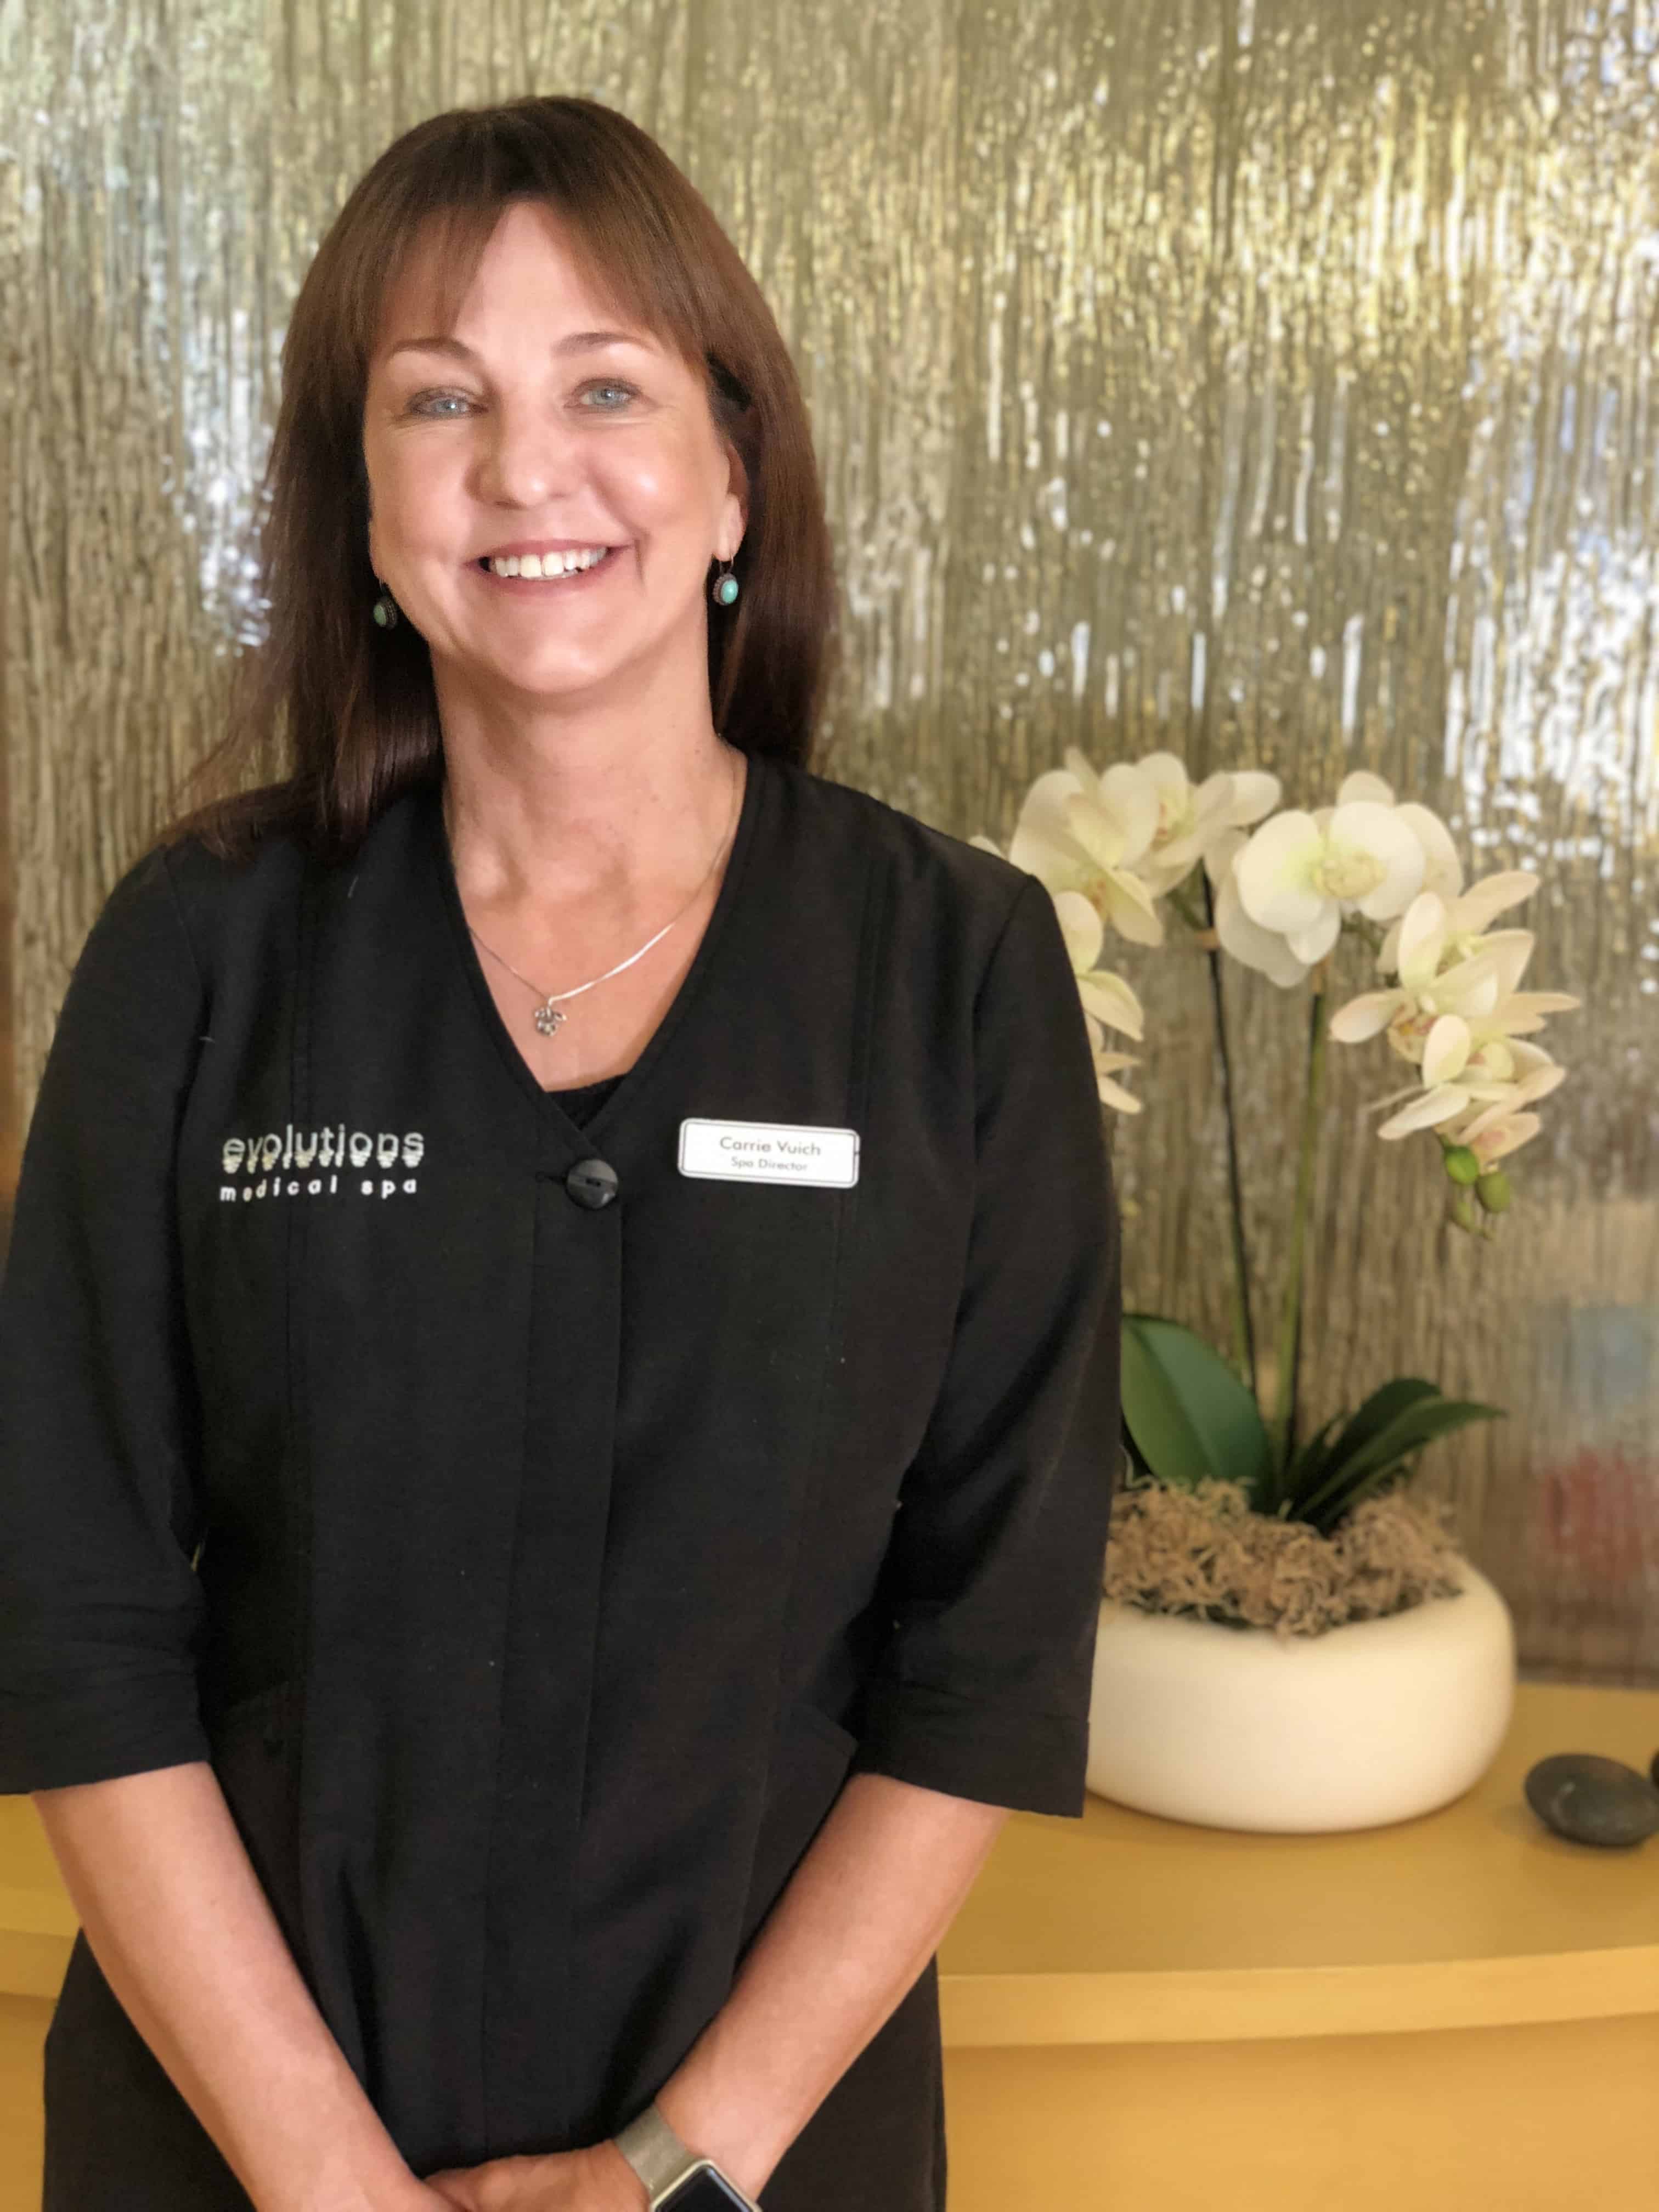 Carrie Vuich, Evolutions Medical and Day Spa